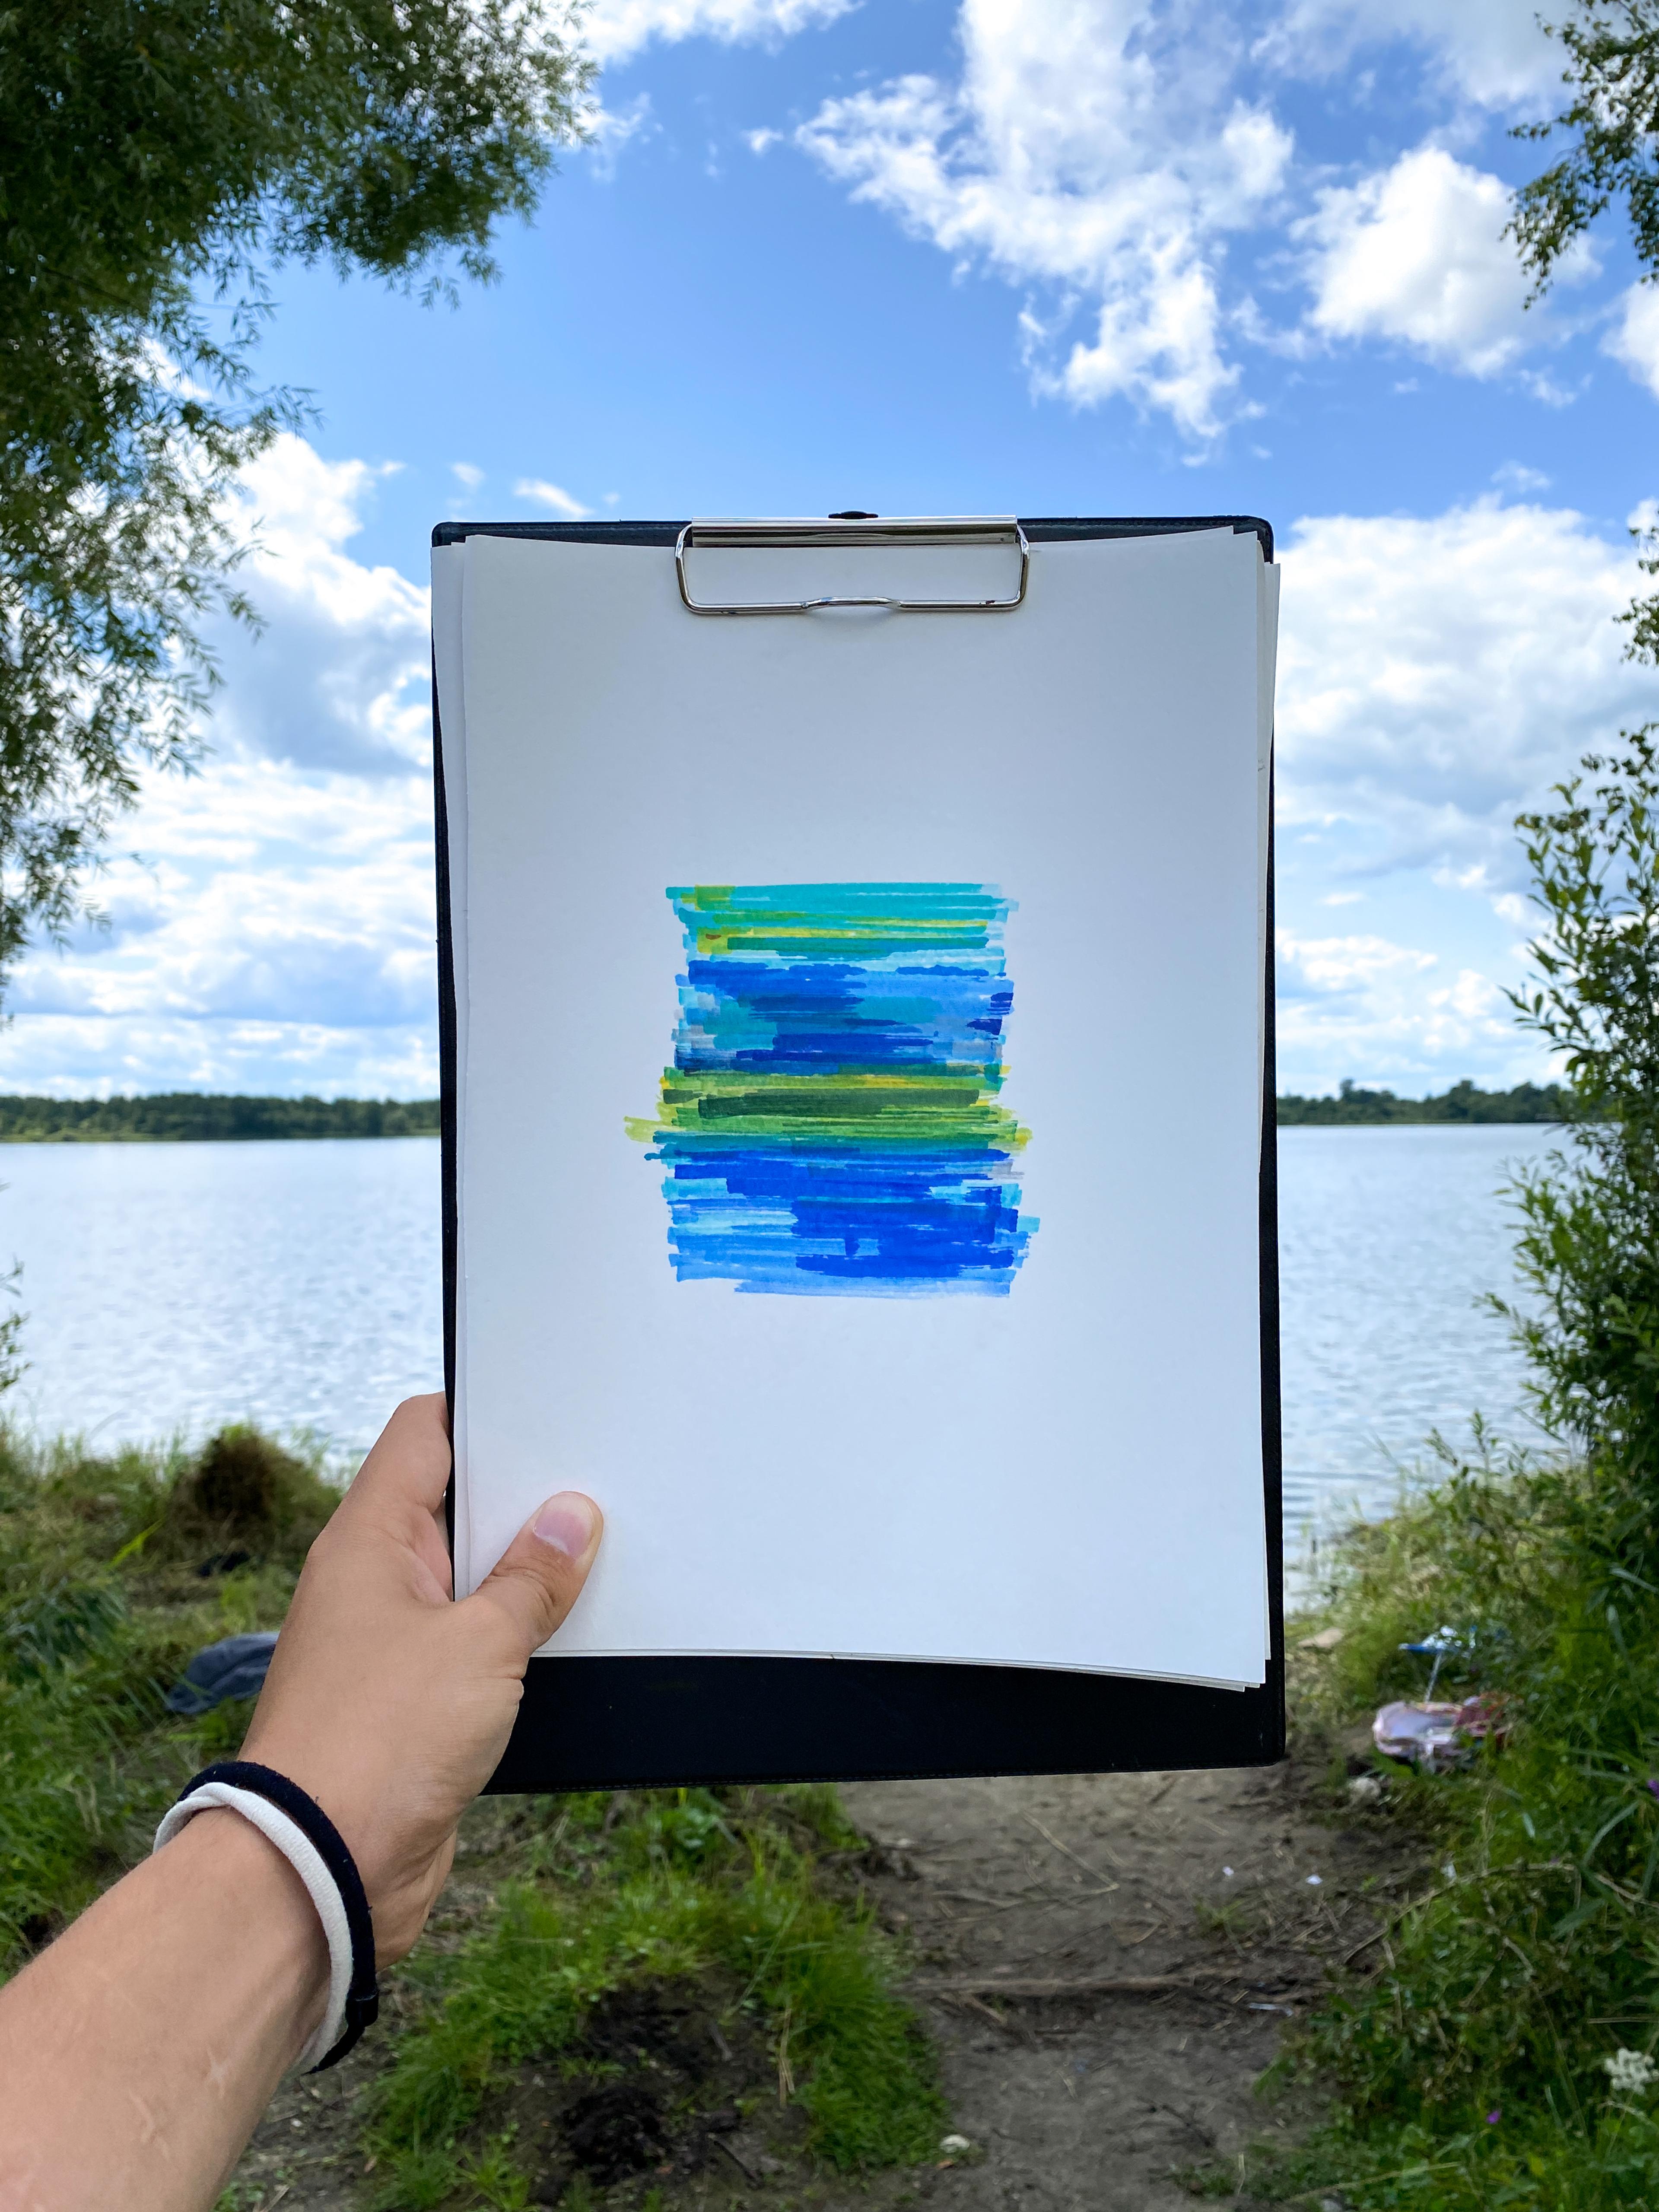 Someone is holding up a small painting of a lake, you can see the lake in the background.